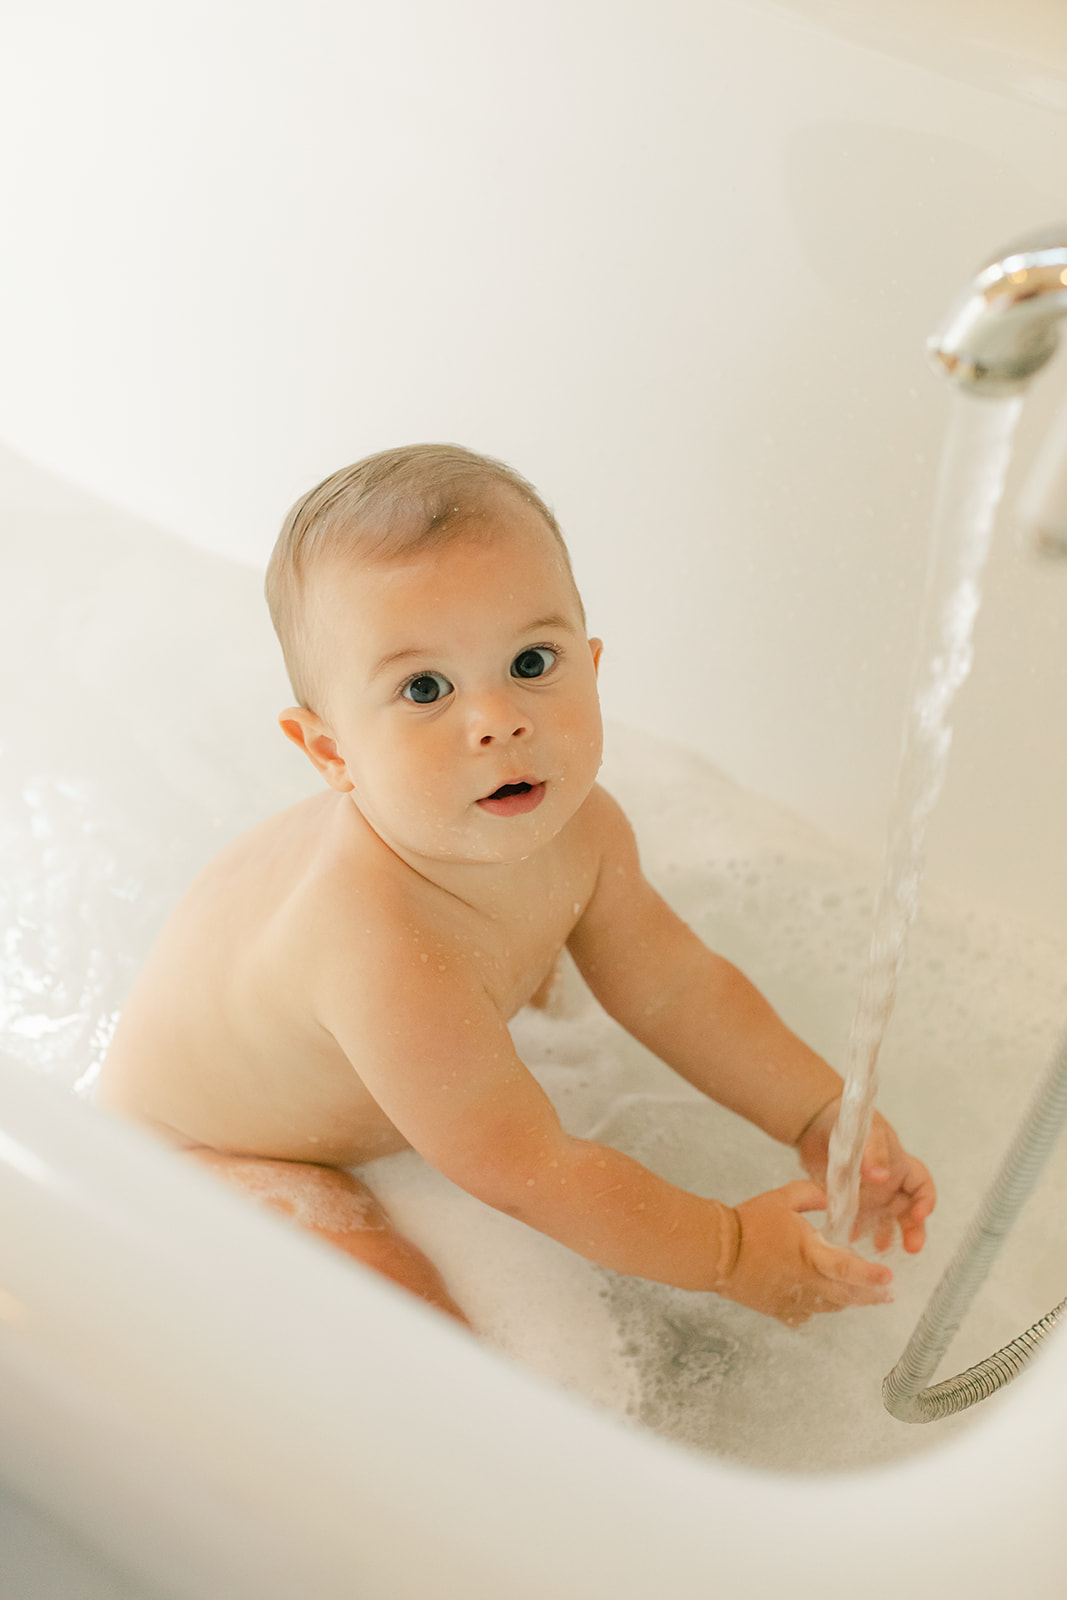 1 year milestone session for baby boy. Cozy at home session. baby boy in bathtub